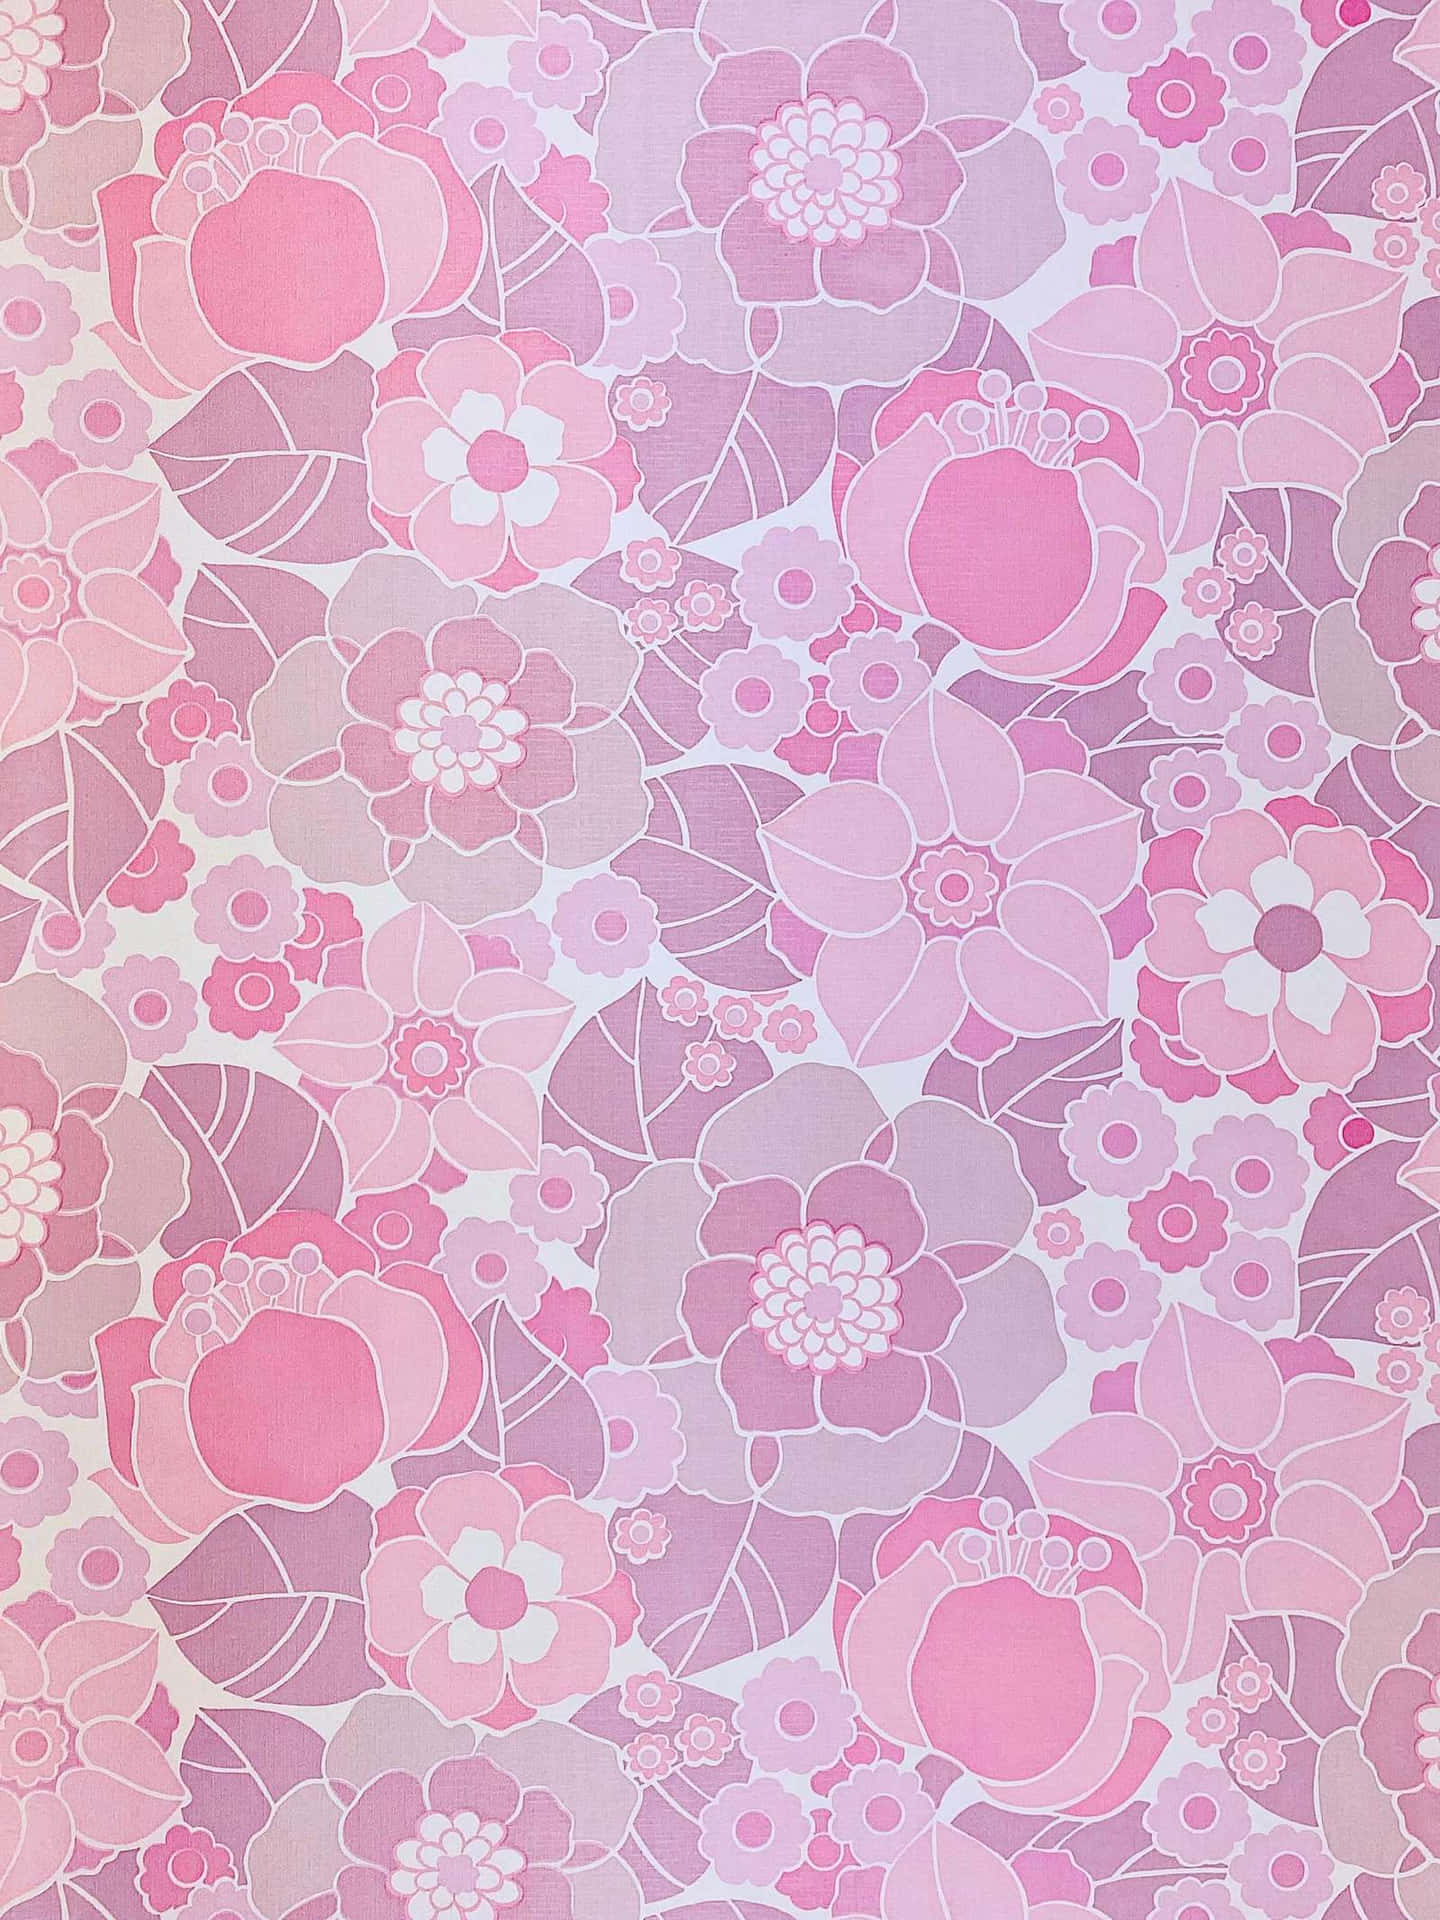 A Pink And White Floral Pattern Wallpaper